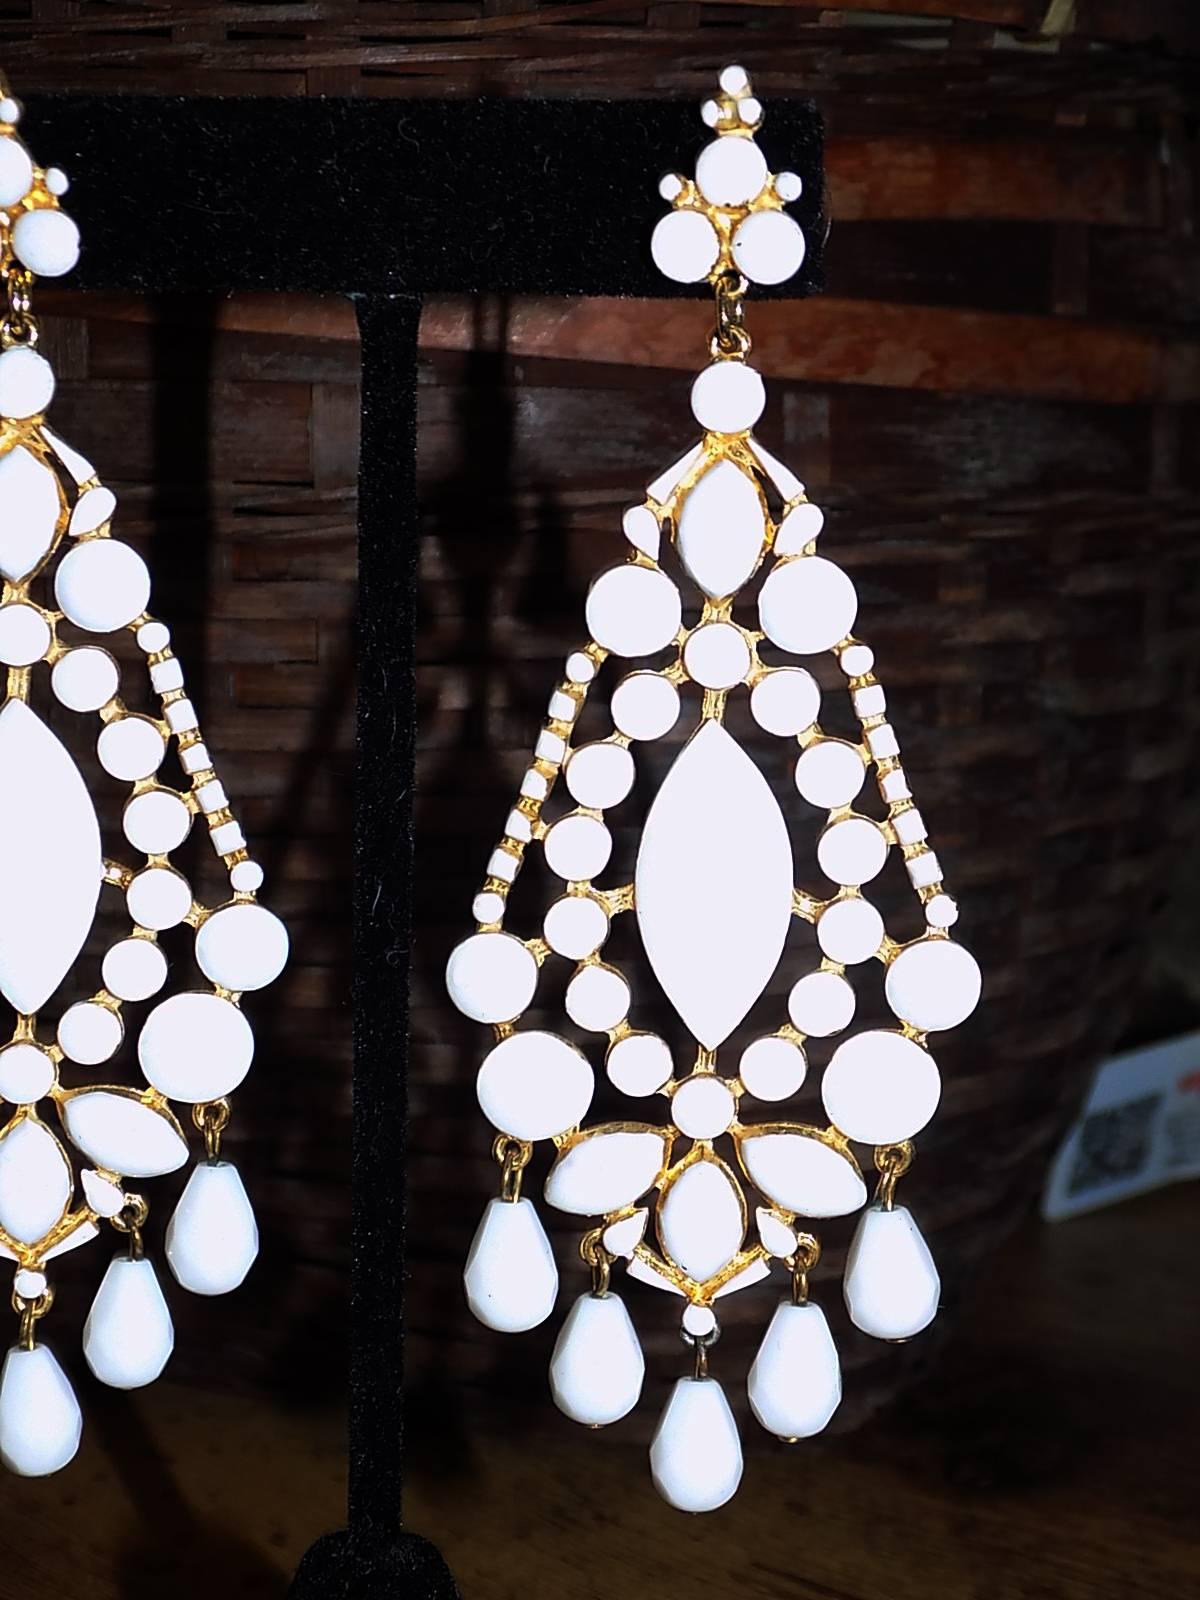 Pristine condition , signed white large Spectacular vintage Ben Amun chandelier earrings. A must have for summer. They are 4